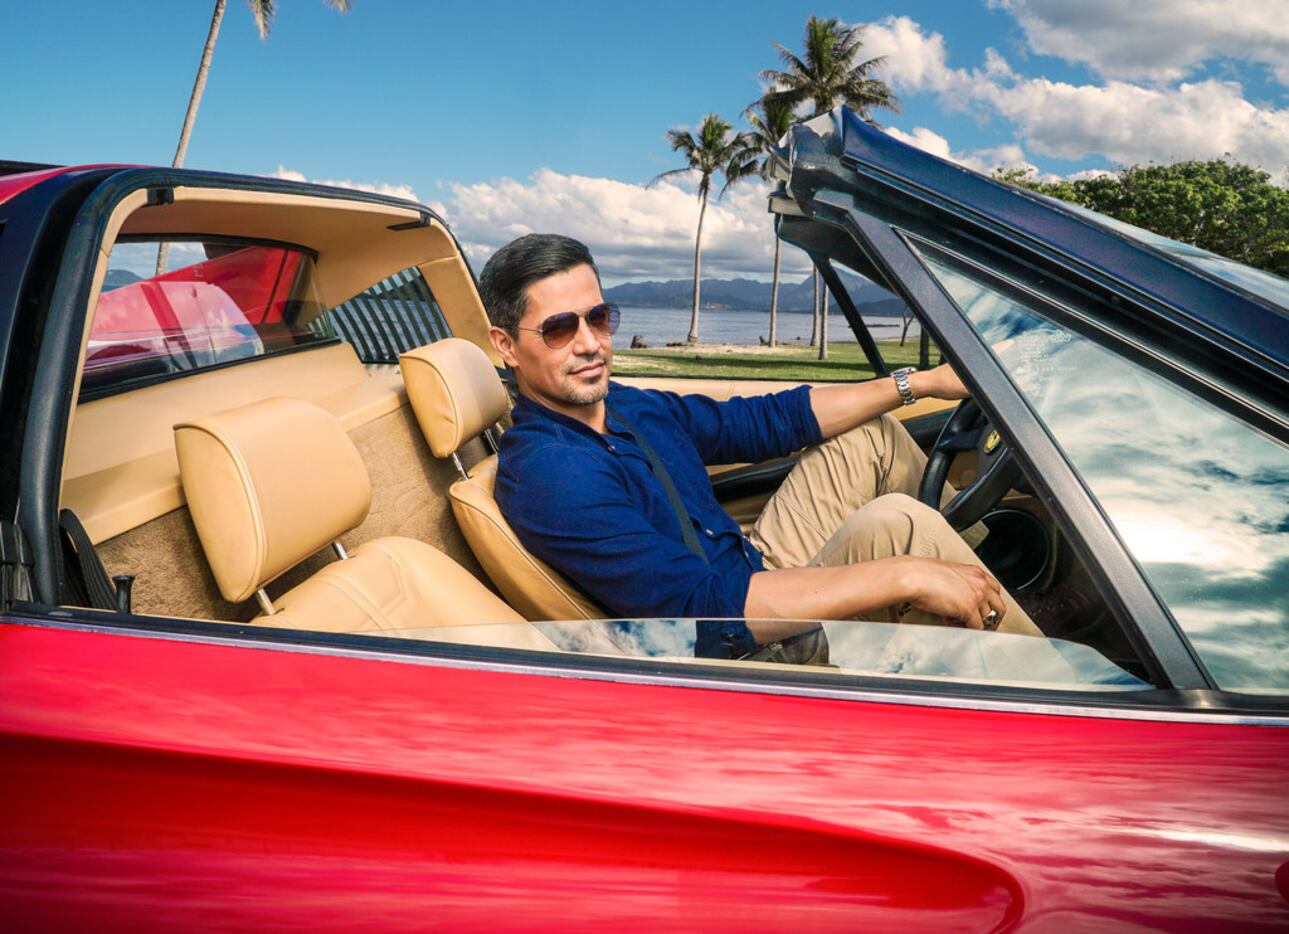 "Magnum P.I." is a modern take on the classic series starring Jay Hernandez (pictured) as...